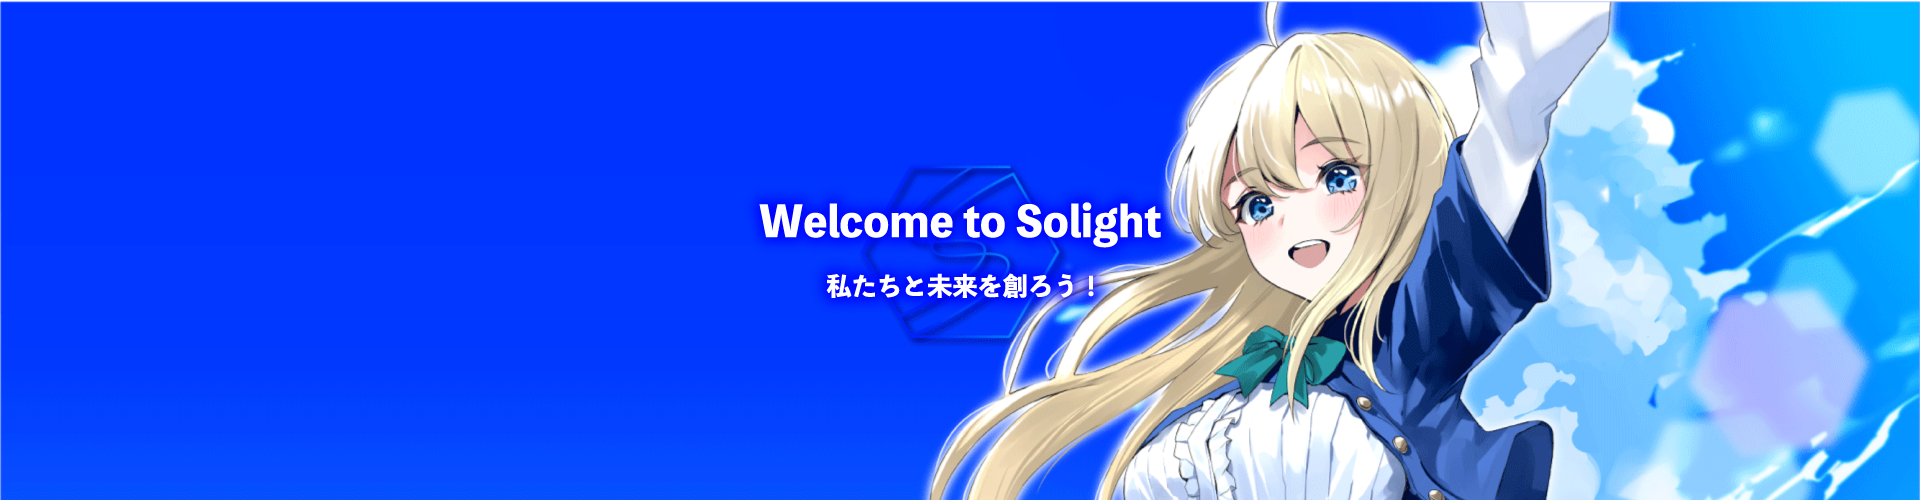 Welcome to Solight